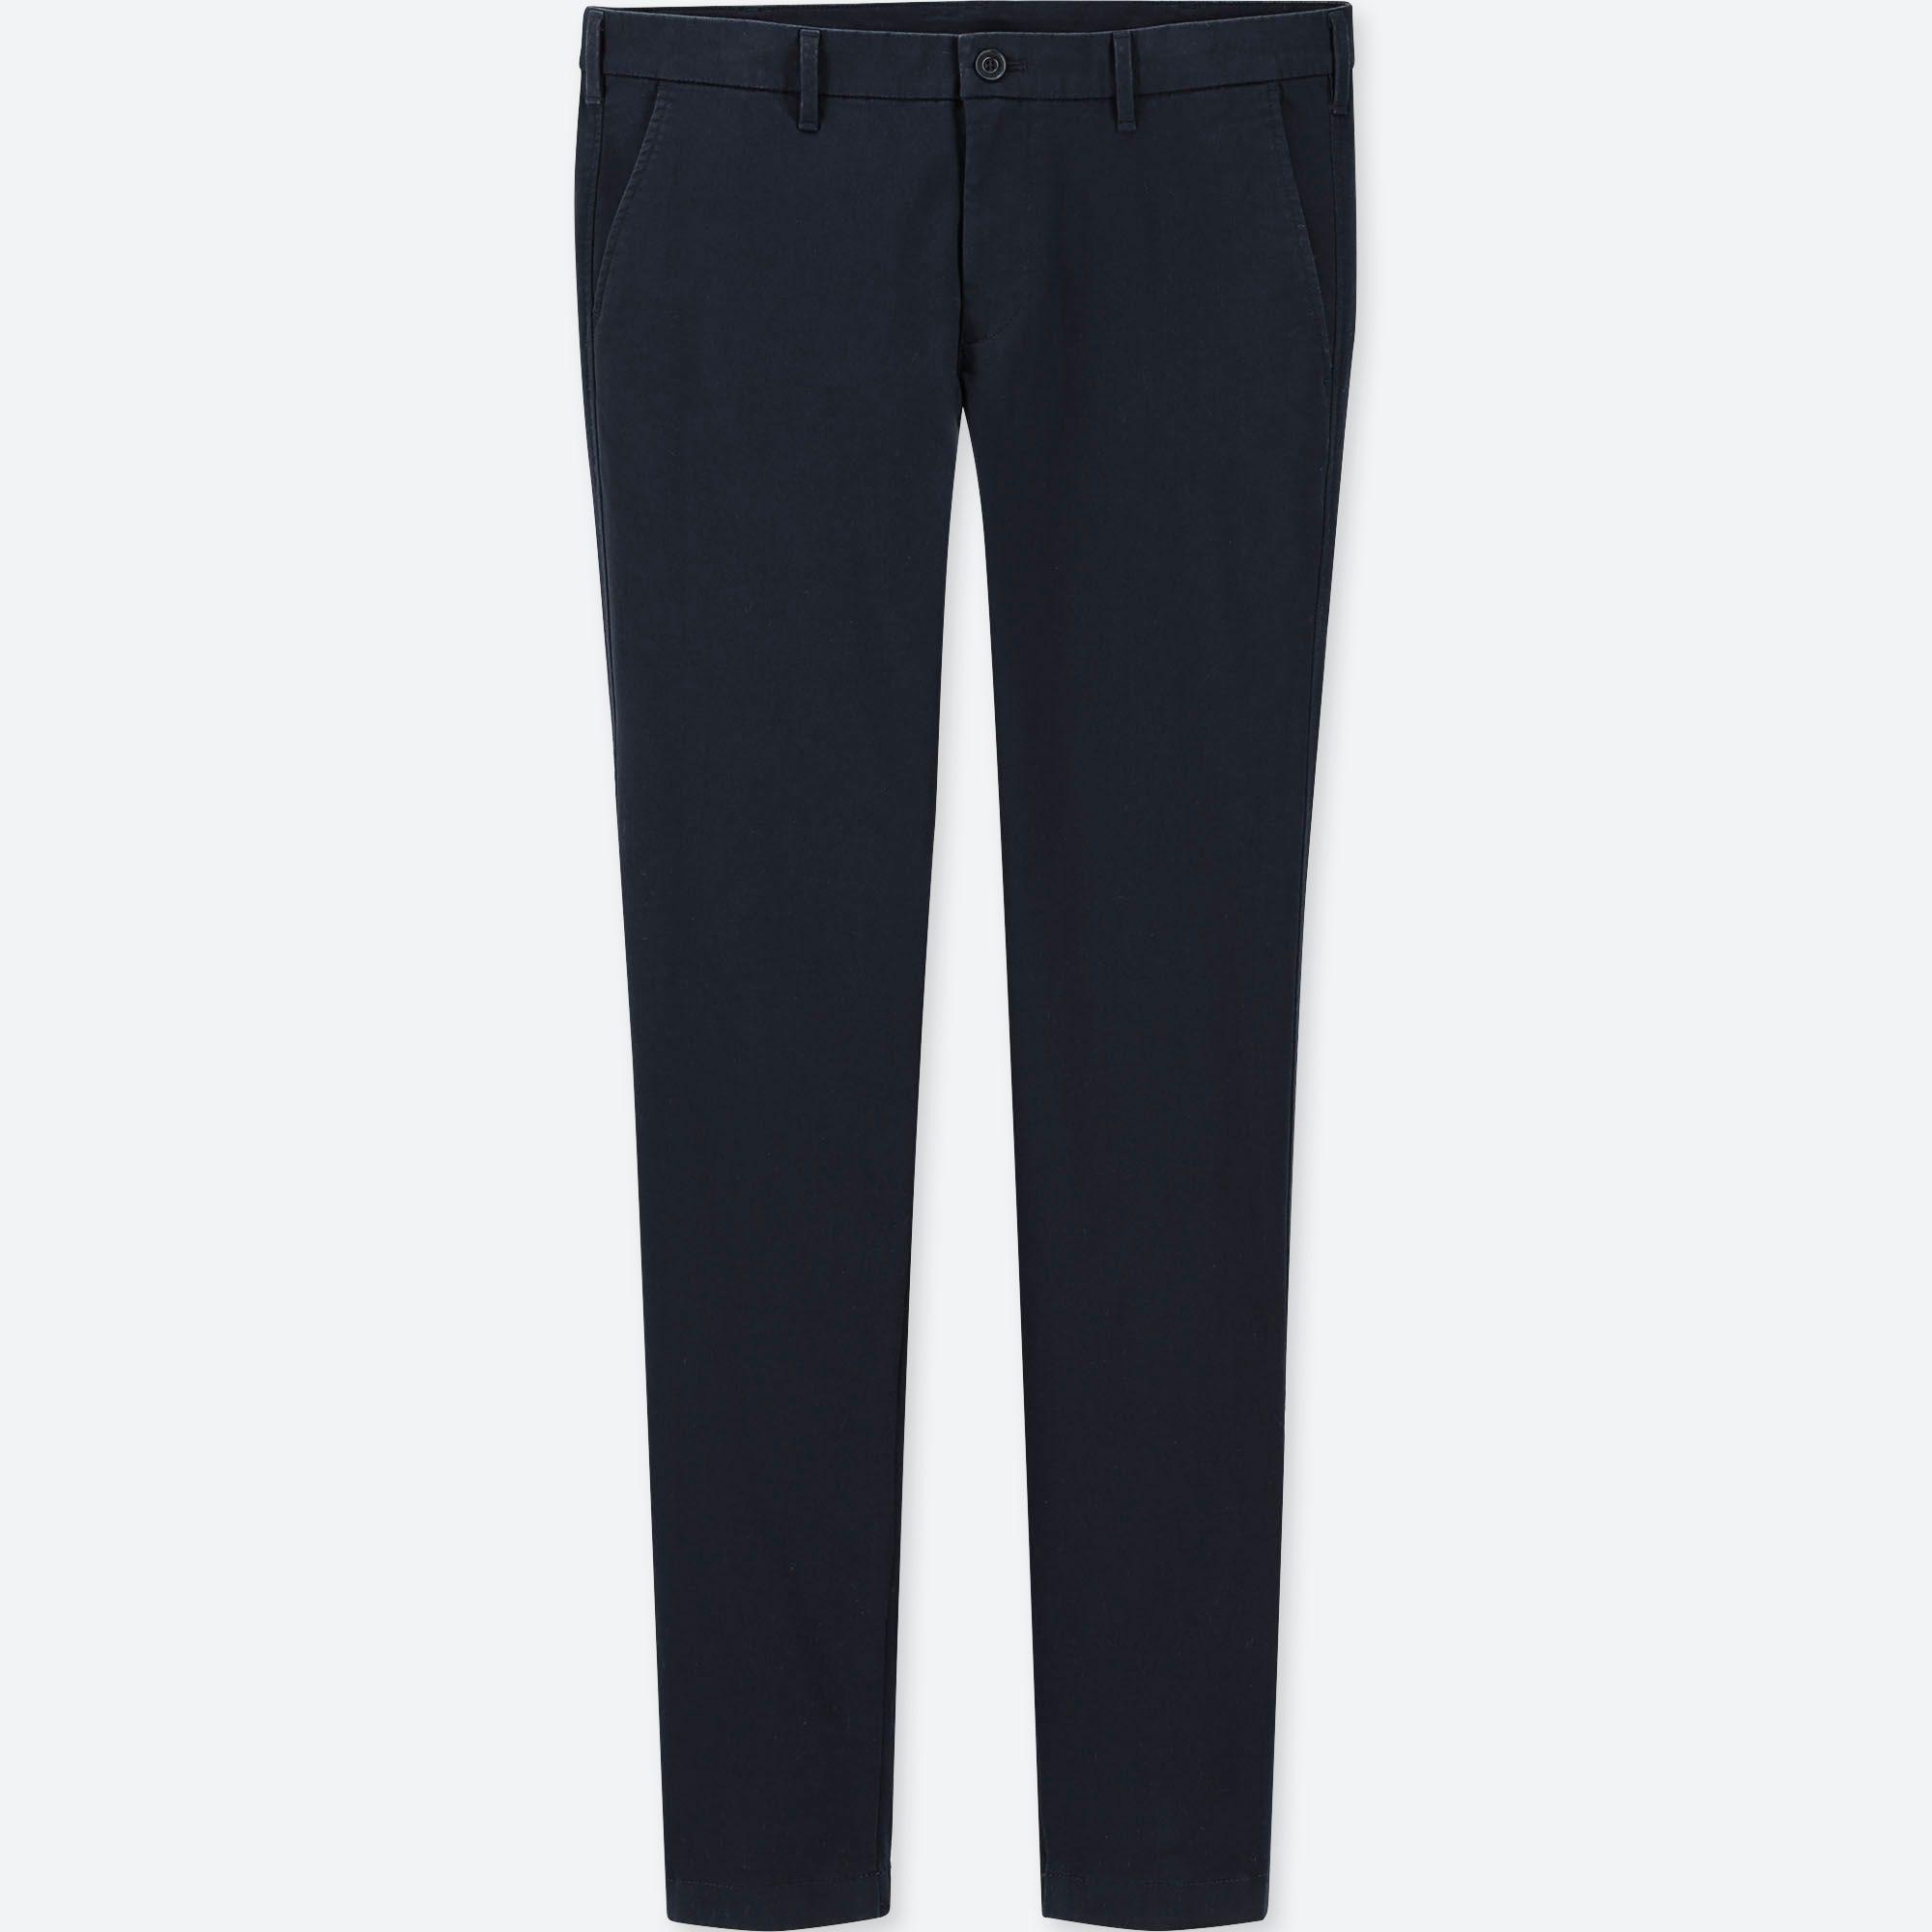 Uniqlo Ultra Stretch Skinny Fit Chino Trousers in Blue for Men - Lyst